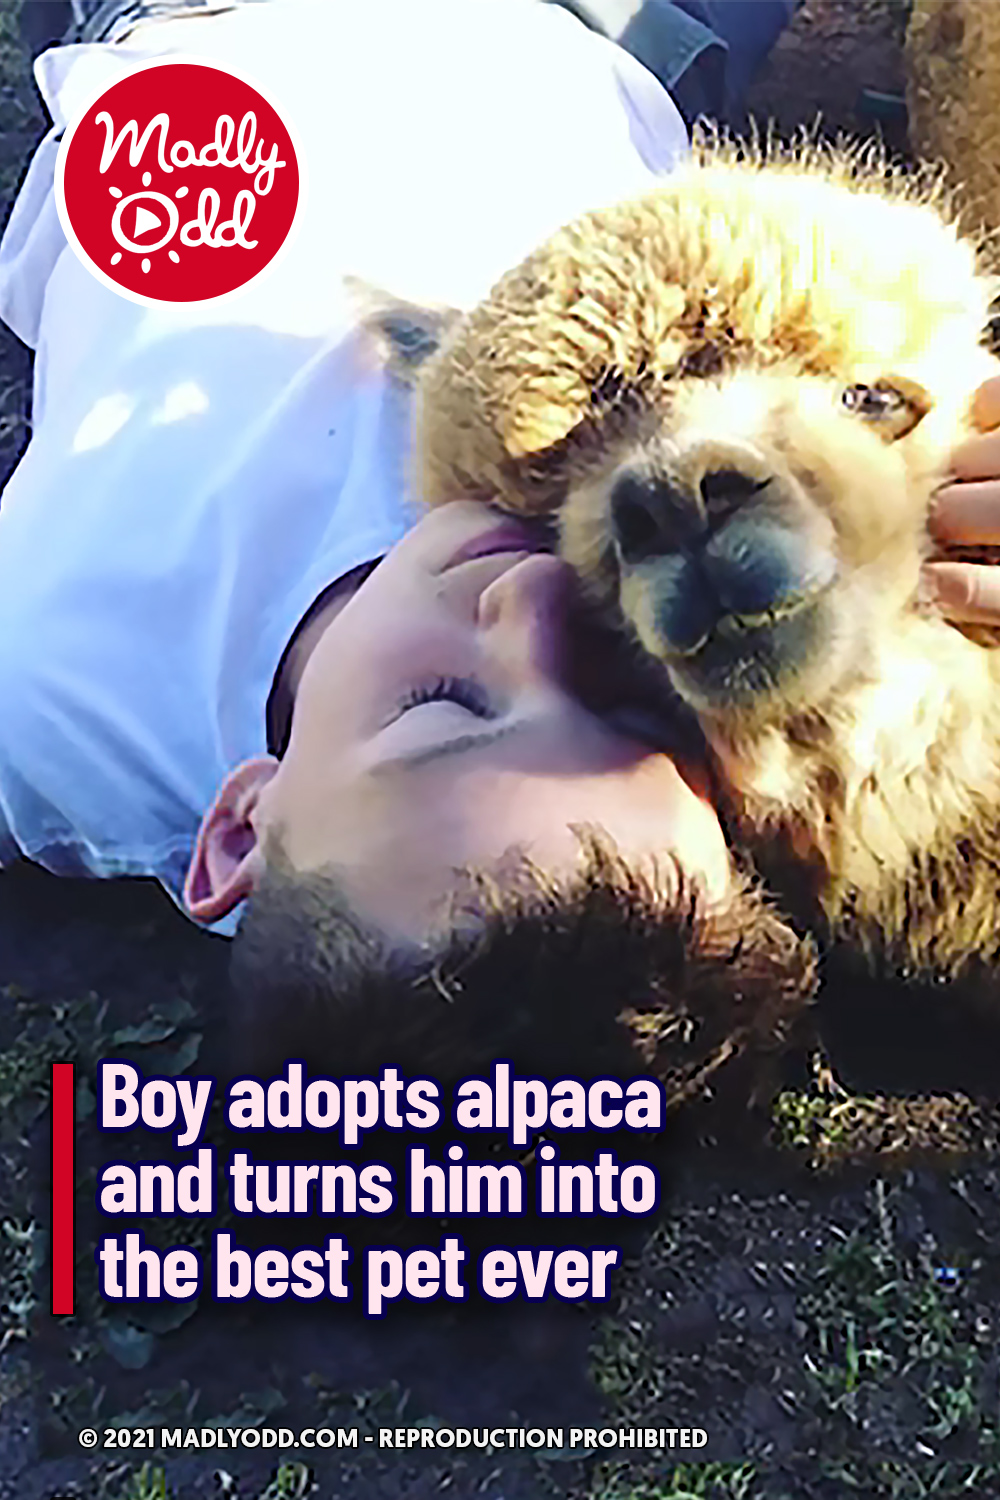 Boy adopts alpaca and turns him into the best pet ever